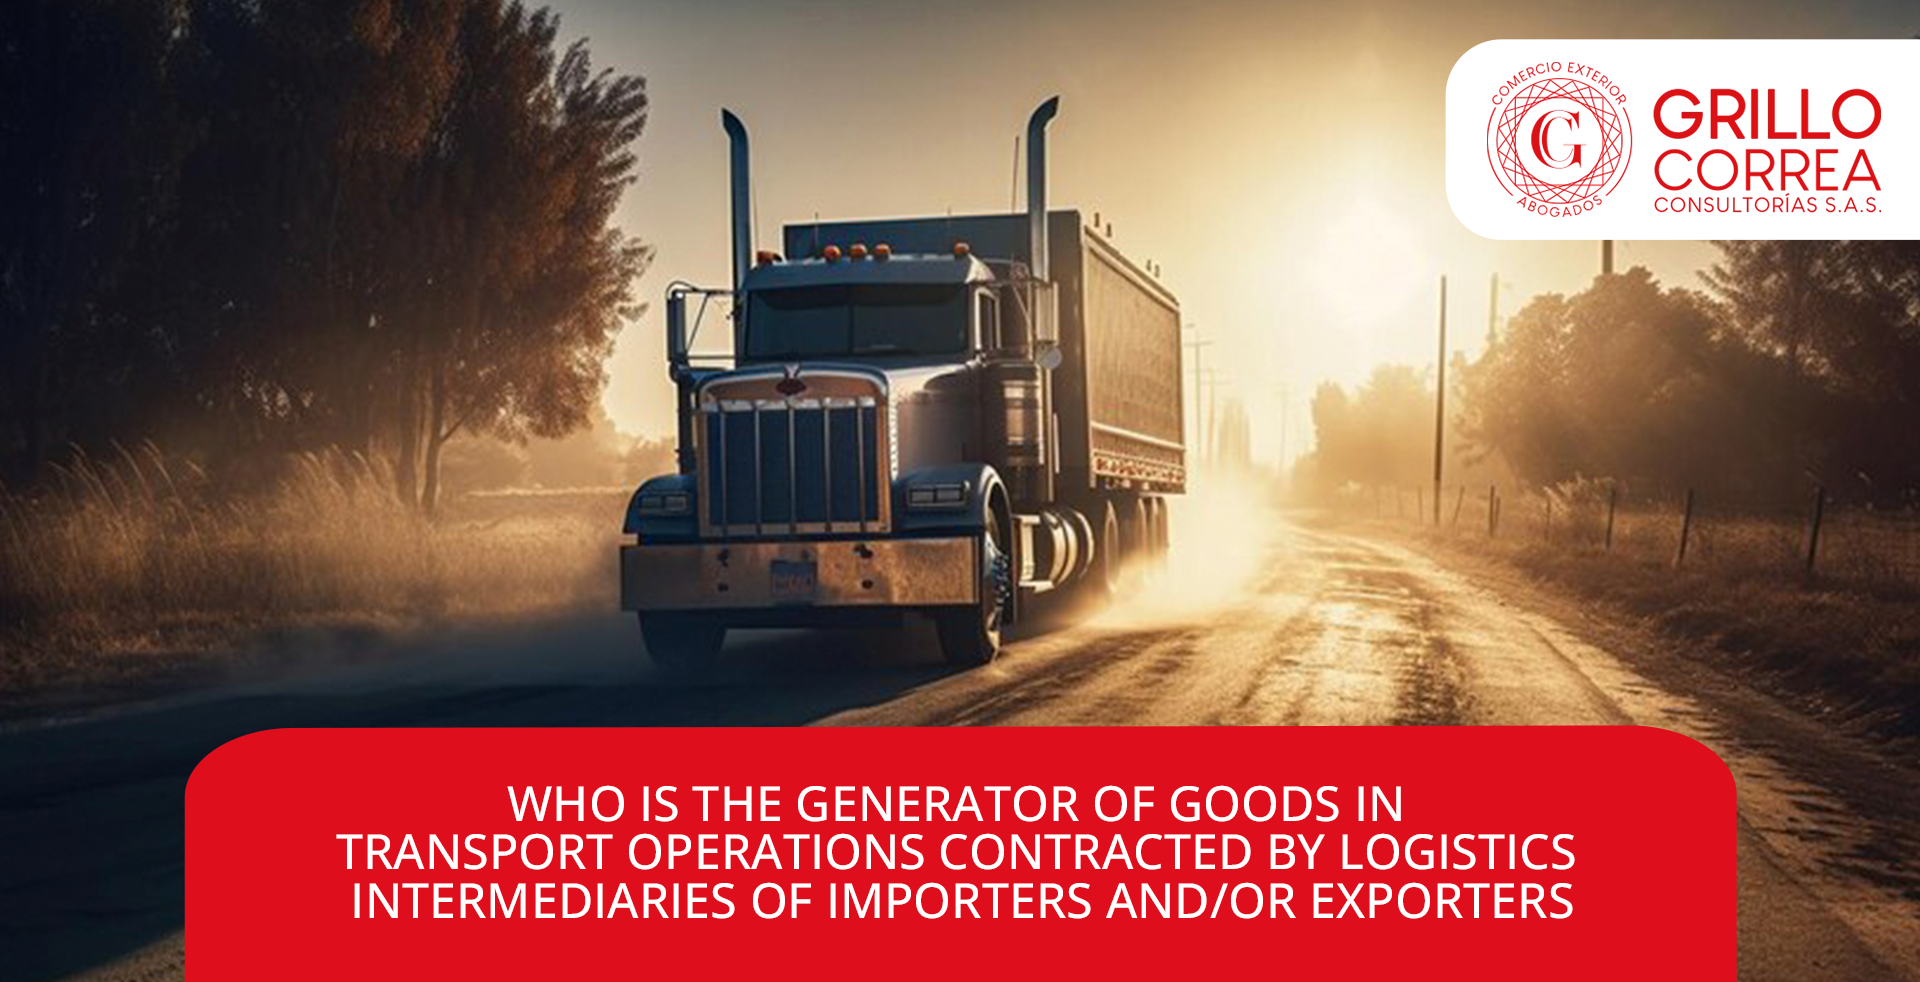 WHO IS THE GENERATOR OF GOODS IN TRANSPORT OPERATIONS CONTRACTED BY LOGISTICS INTERMEDIARIES OF IMPORTERS AND-OR EXPORTERS